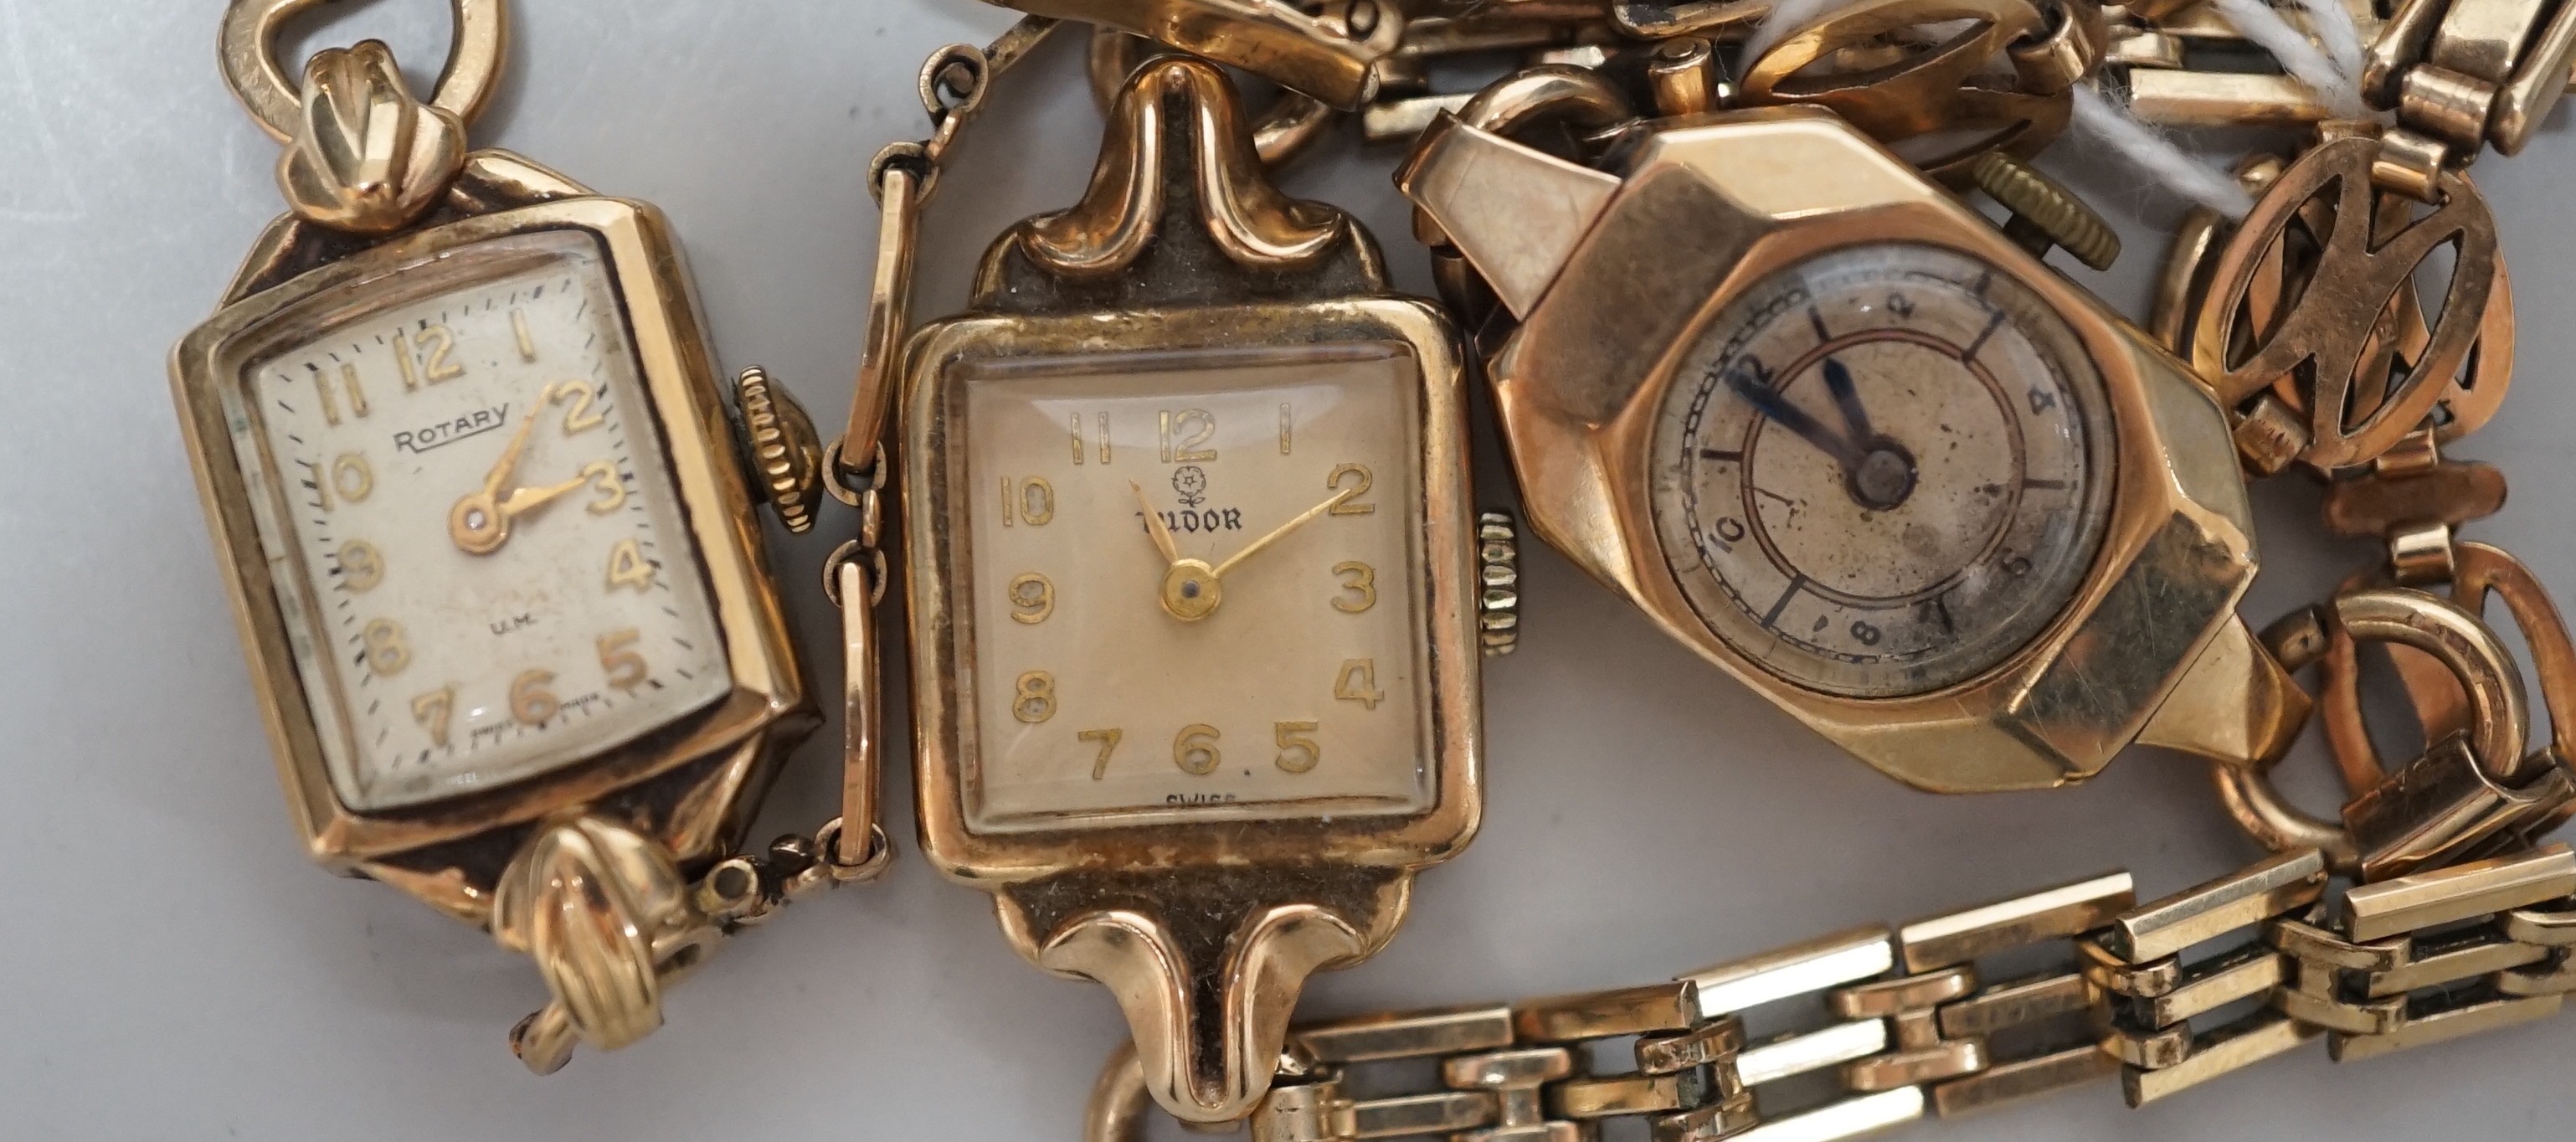 Two lady's 9ct gold manual wind wrist watches, including Rotary, on 9ct gold bracelets, gross weight 26.2 grams and a lady's 9ct gold Tudor manual wind wrist watch, on a steel and gold plated bracelet.